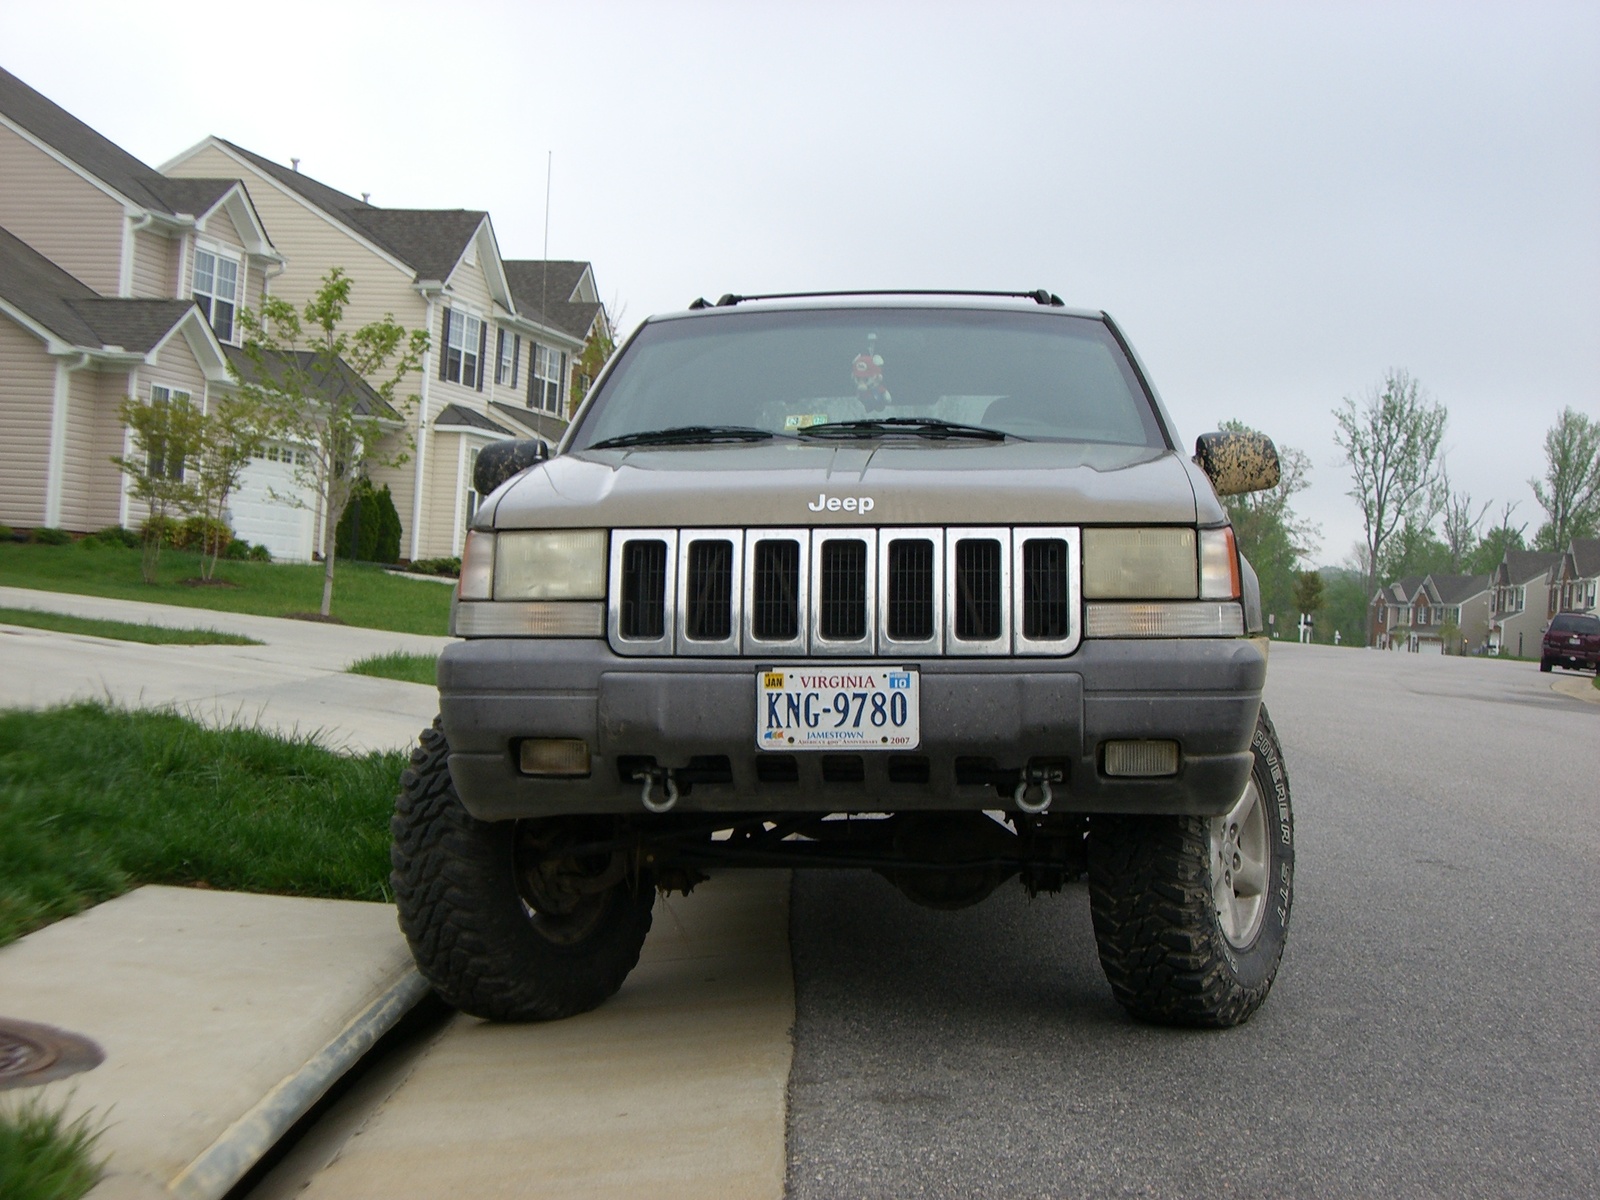 1995 Jeep grand cherokee owners manual